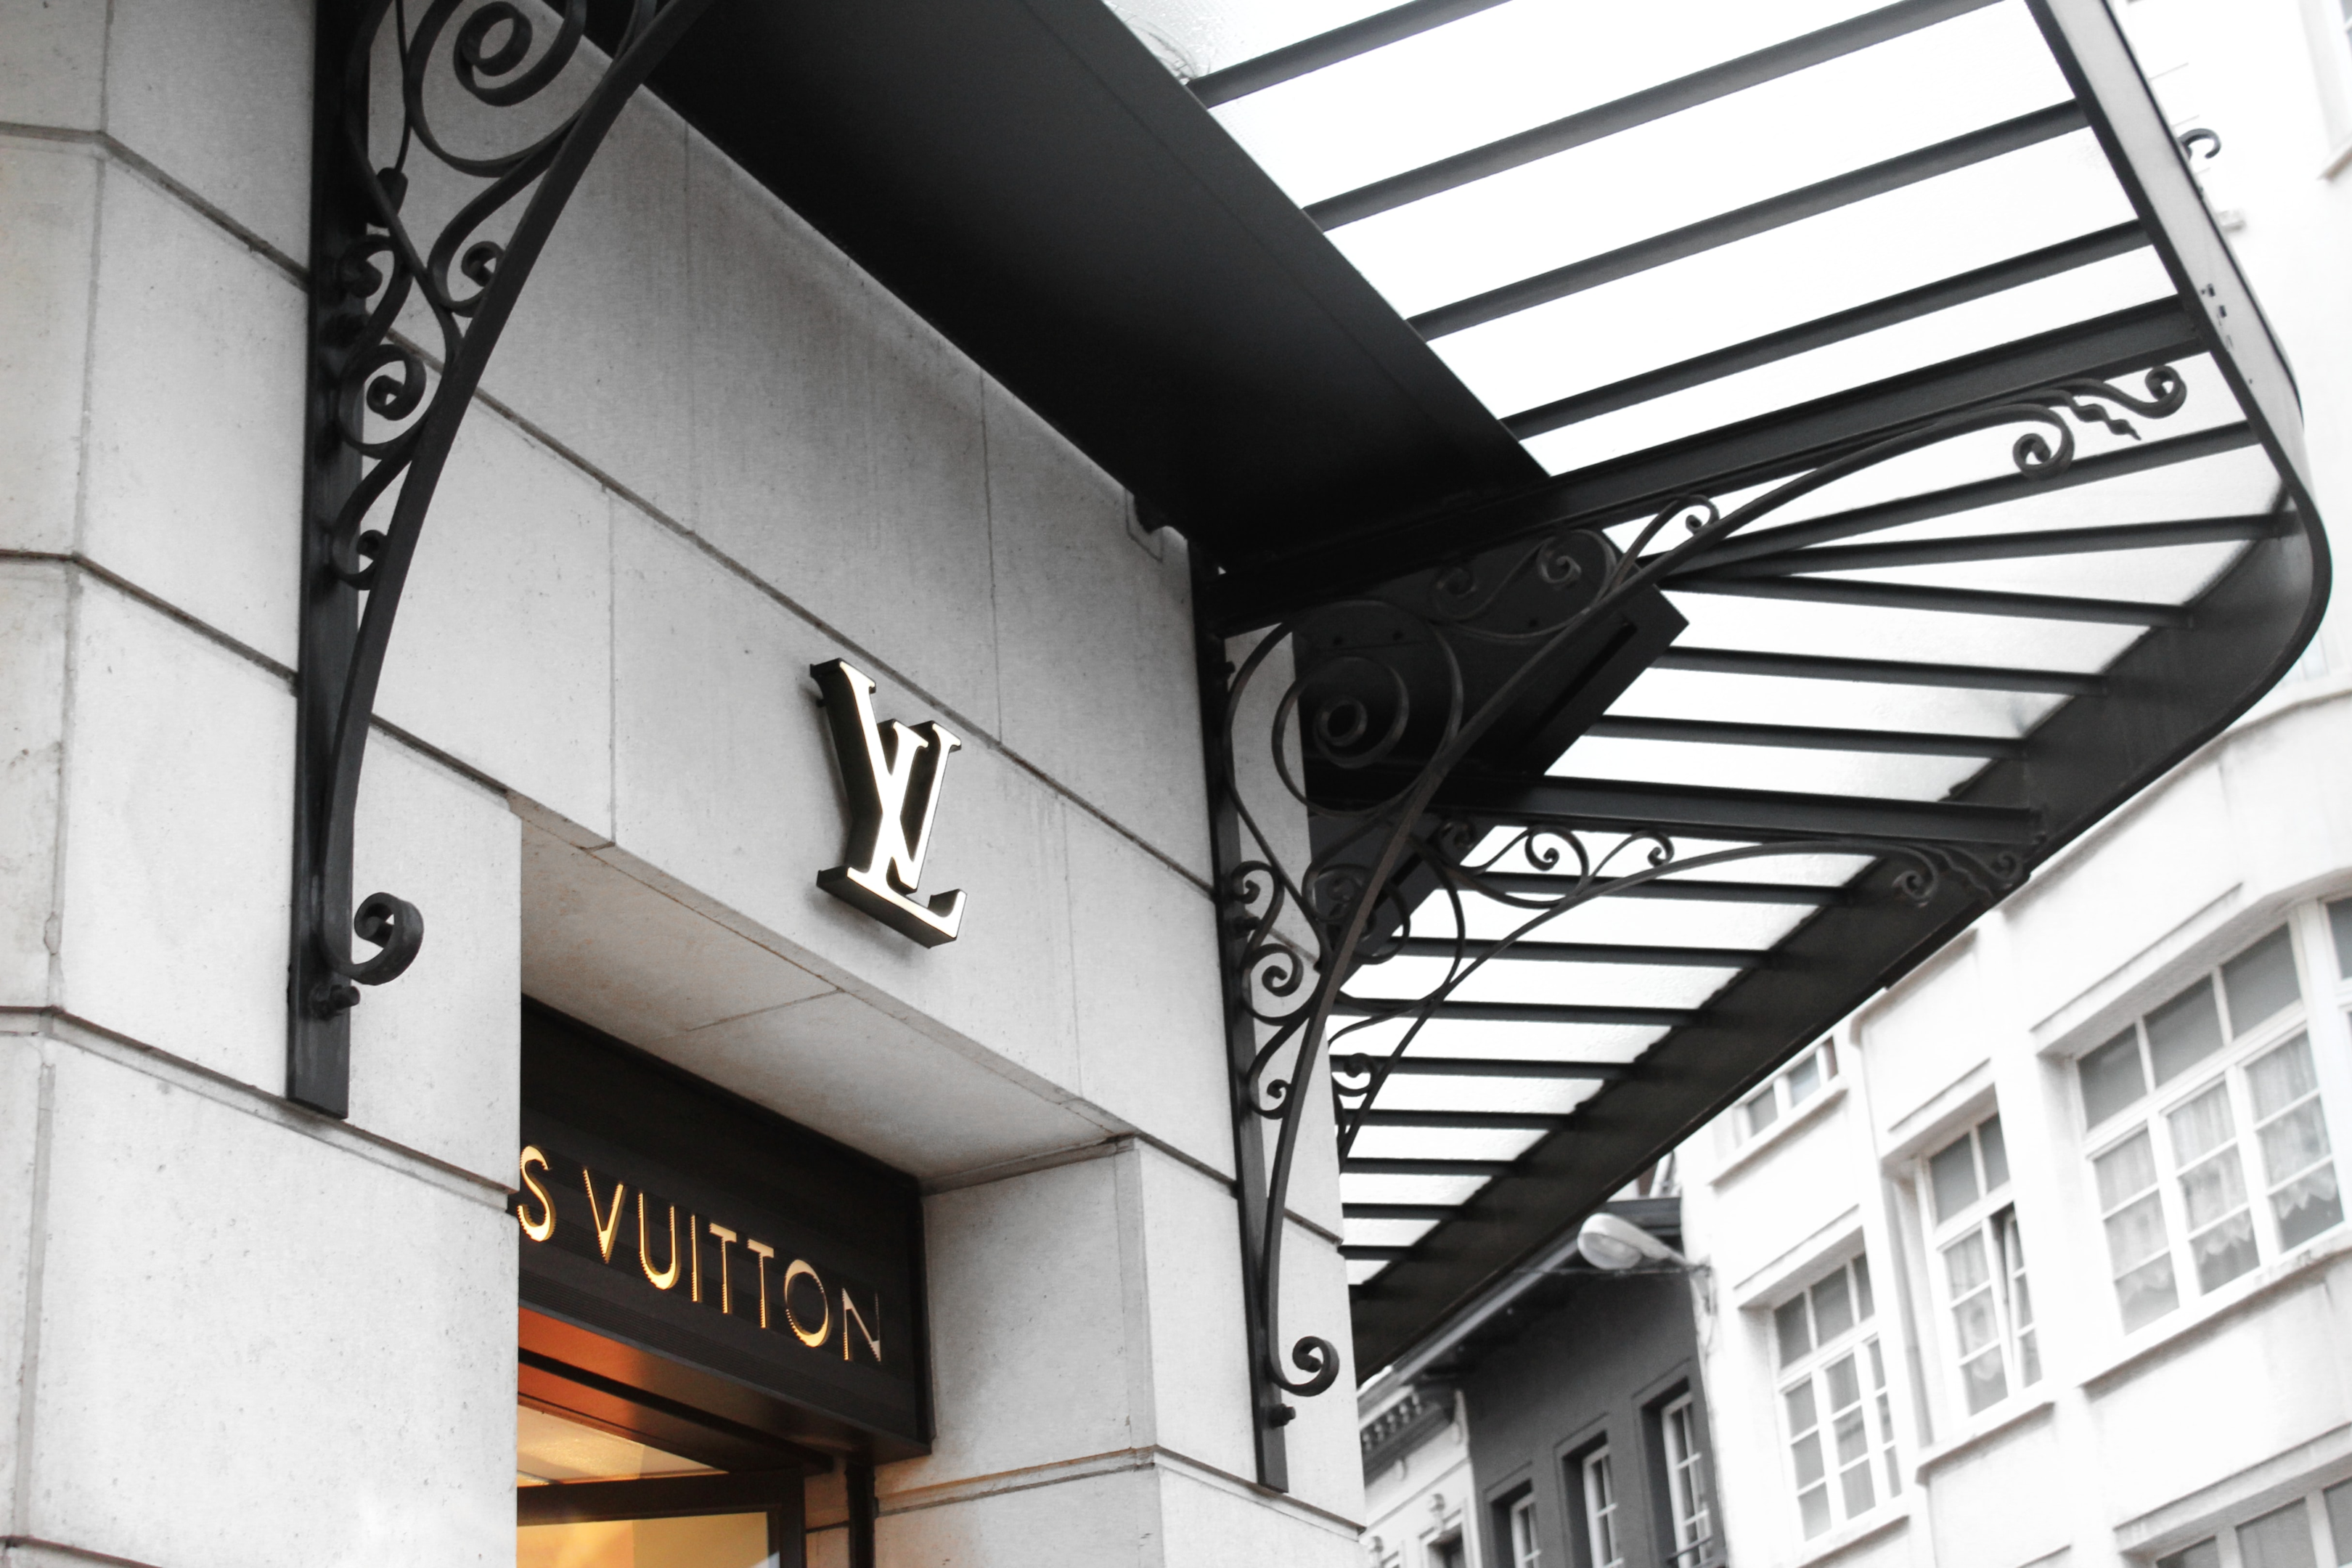 Louis Vuitton is best known for their designer bags and luggages, together with their ready to wear collections | Photo by Llibert Losada from Unsplash